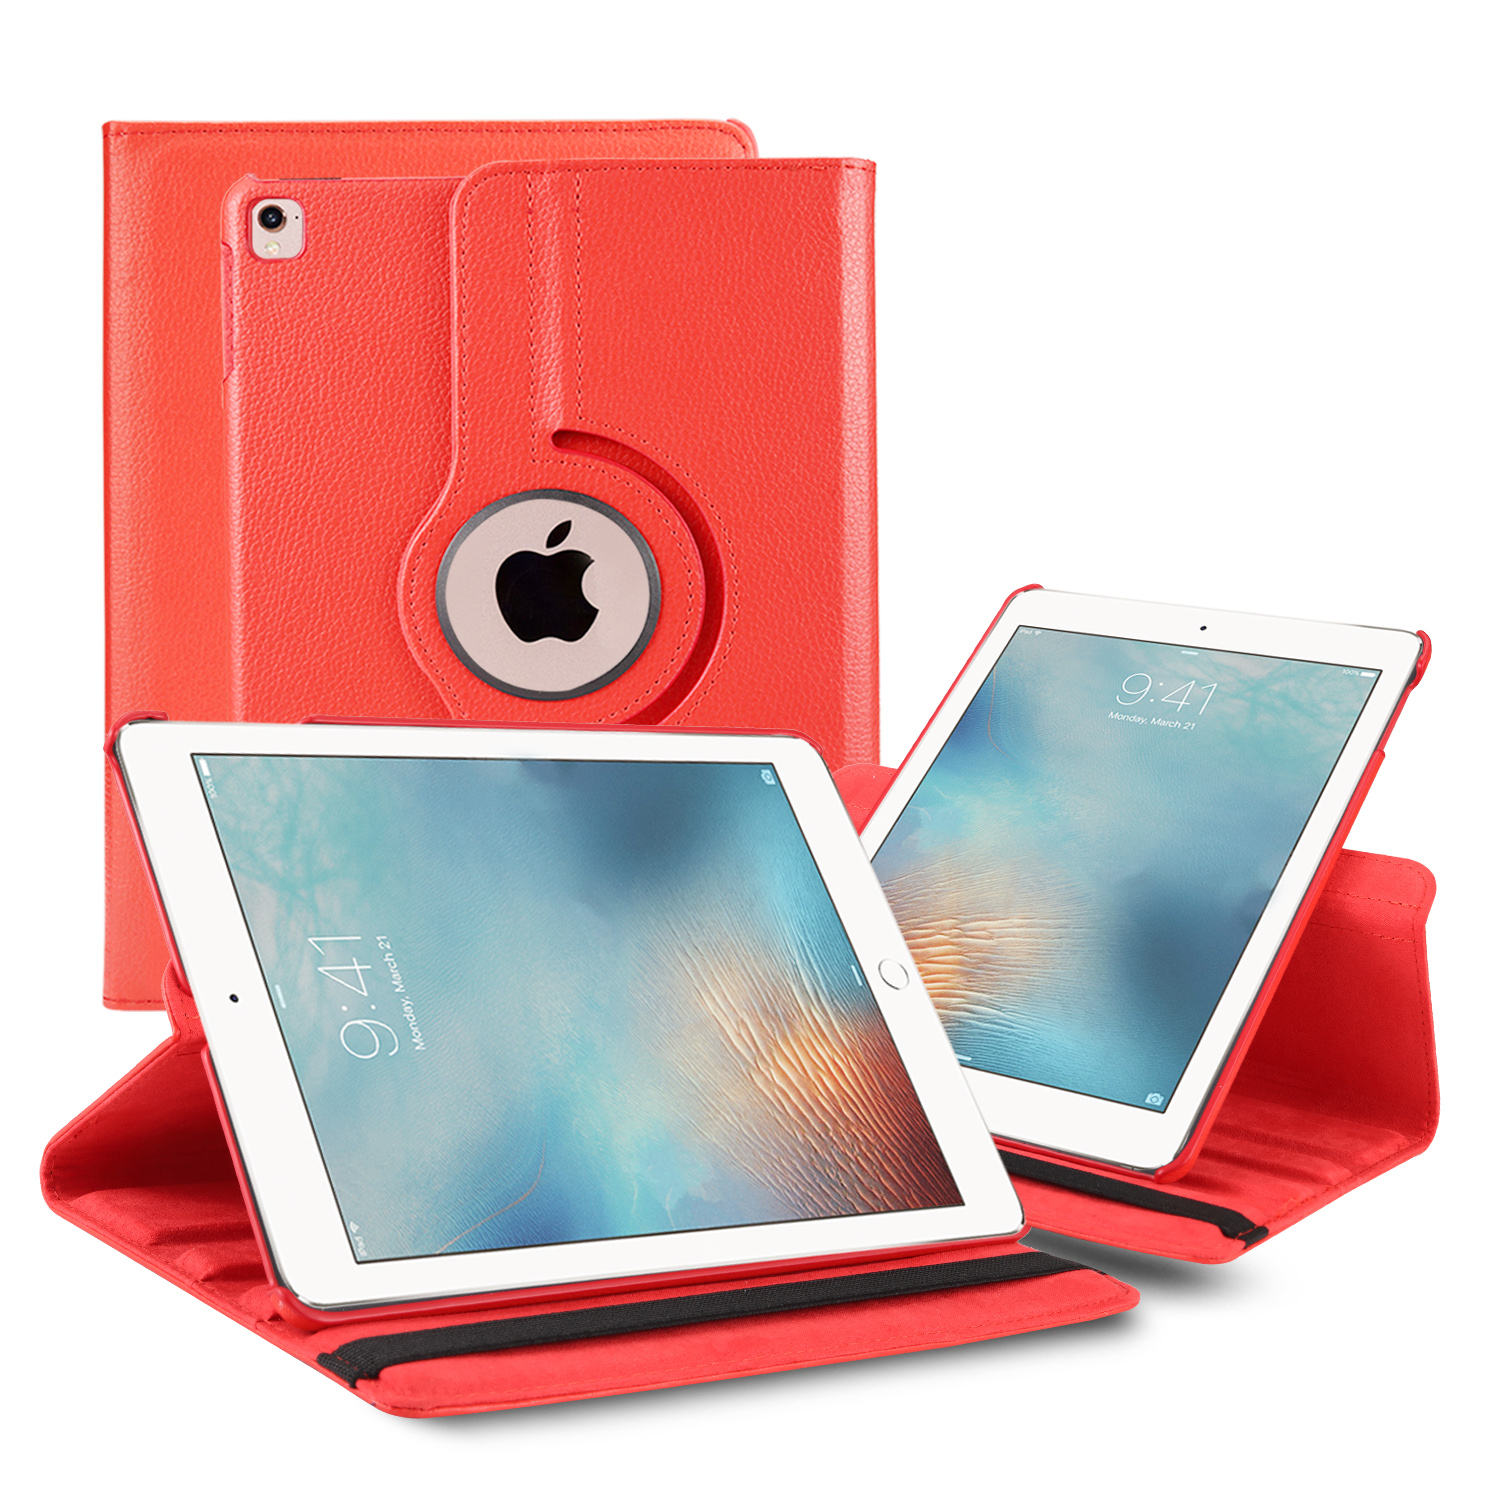 ''360 Degree Rotation Flip Cover LEATHER Kickstand Protective Cover Case for Apple iPad 9.7 [2017],''''